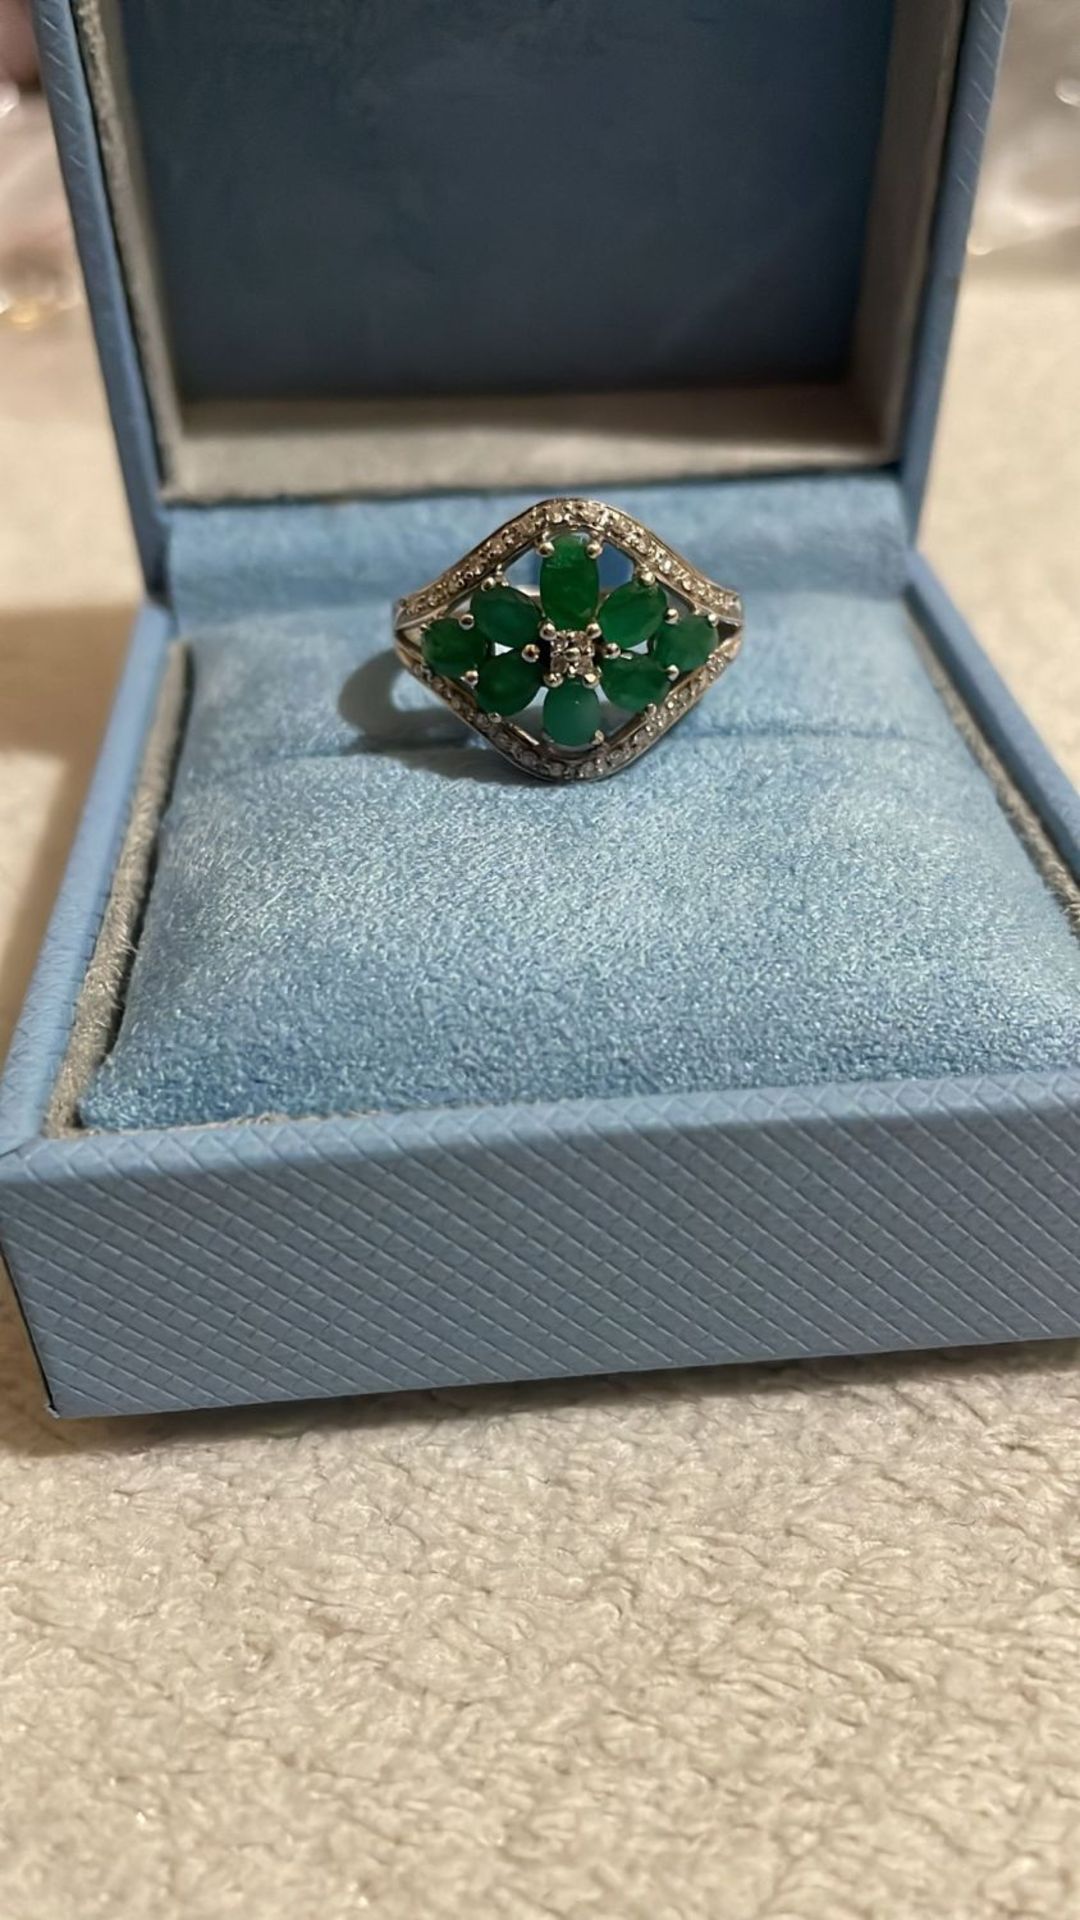 9ct white gold ring with diamonds and emeralds